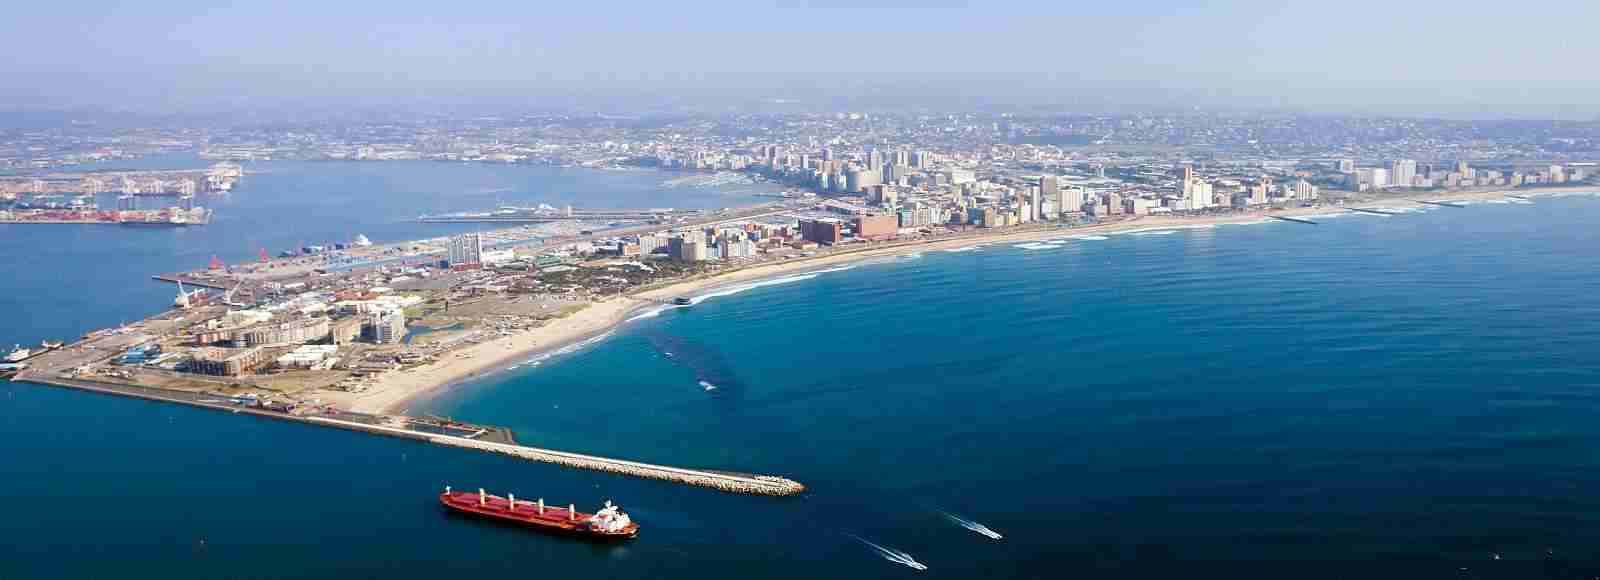 Transfer Offers in Durban. Low Cost Transfers in  Durban 